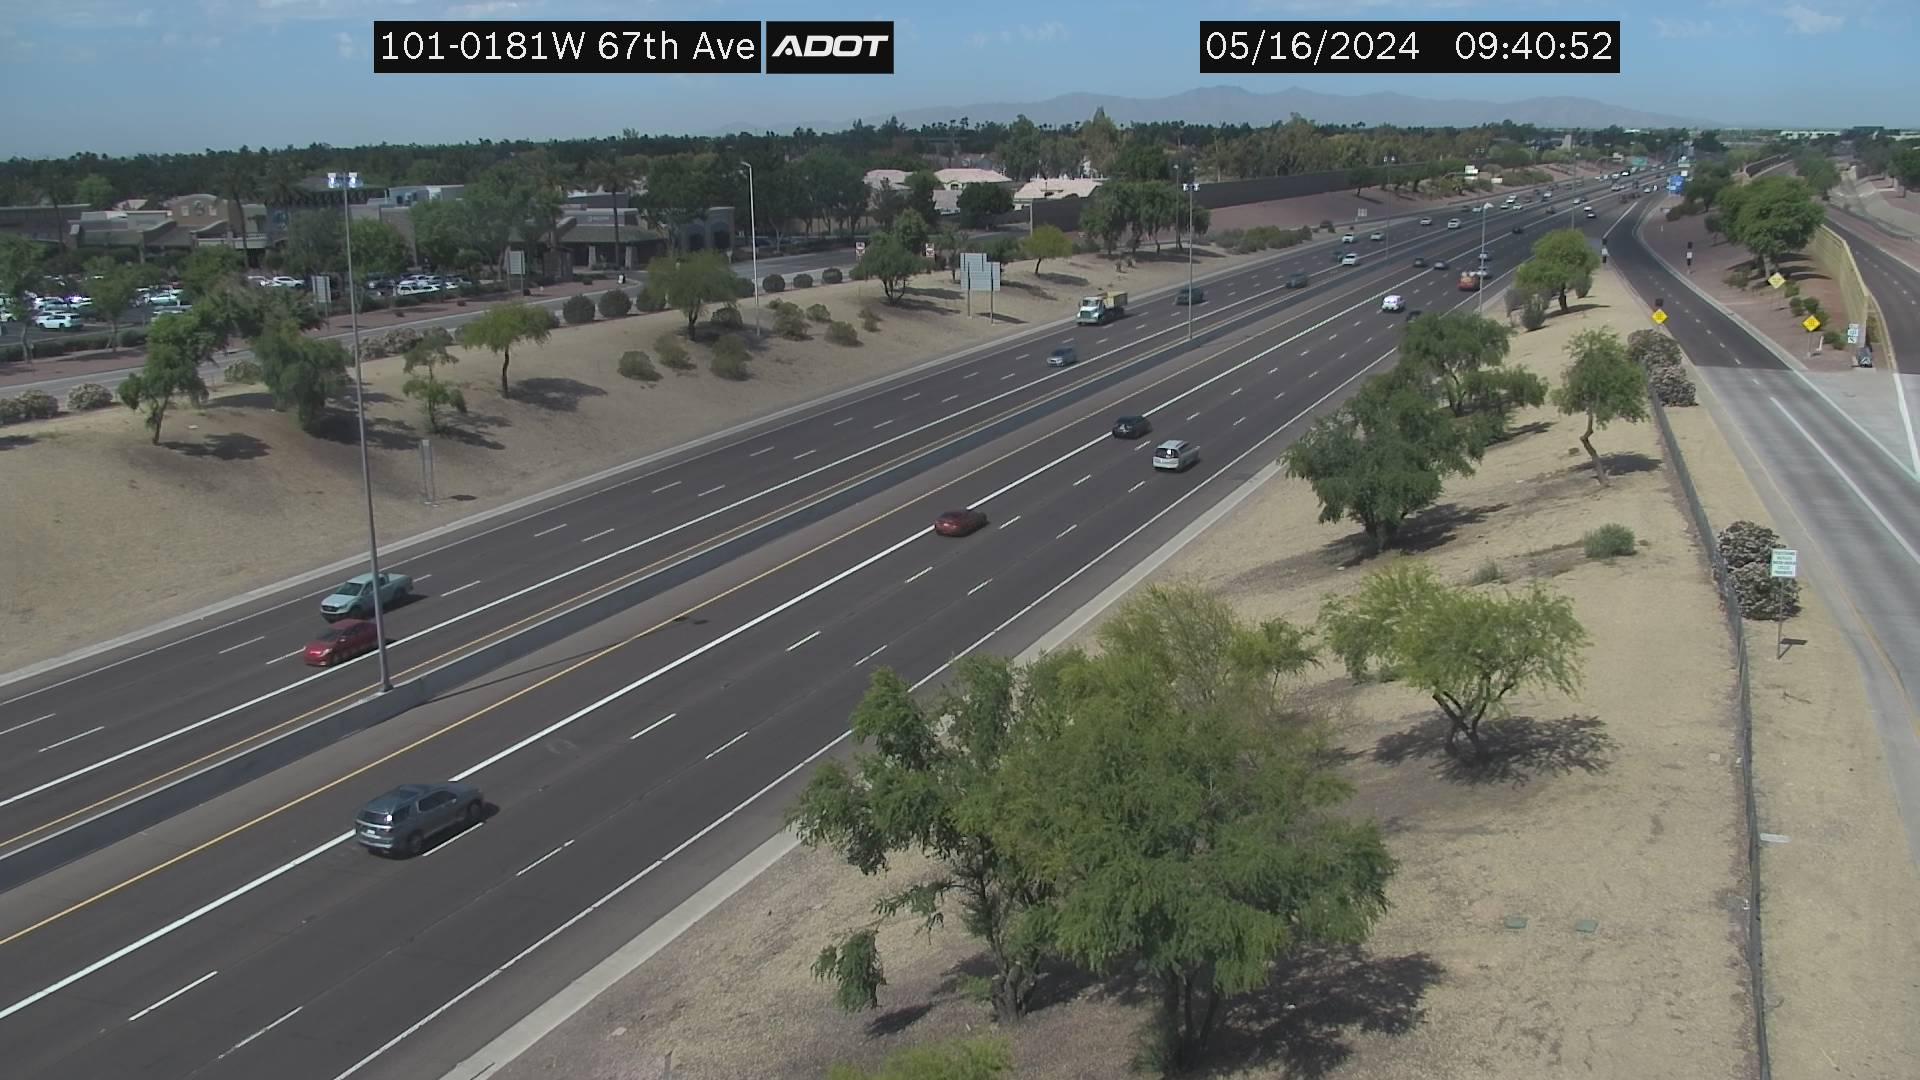 Traffic Cam Glendale › West: I-101 WB 18.10 @67th Ave Player